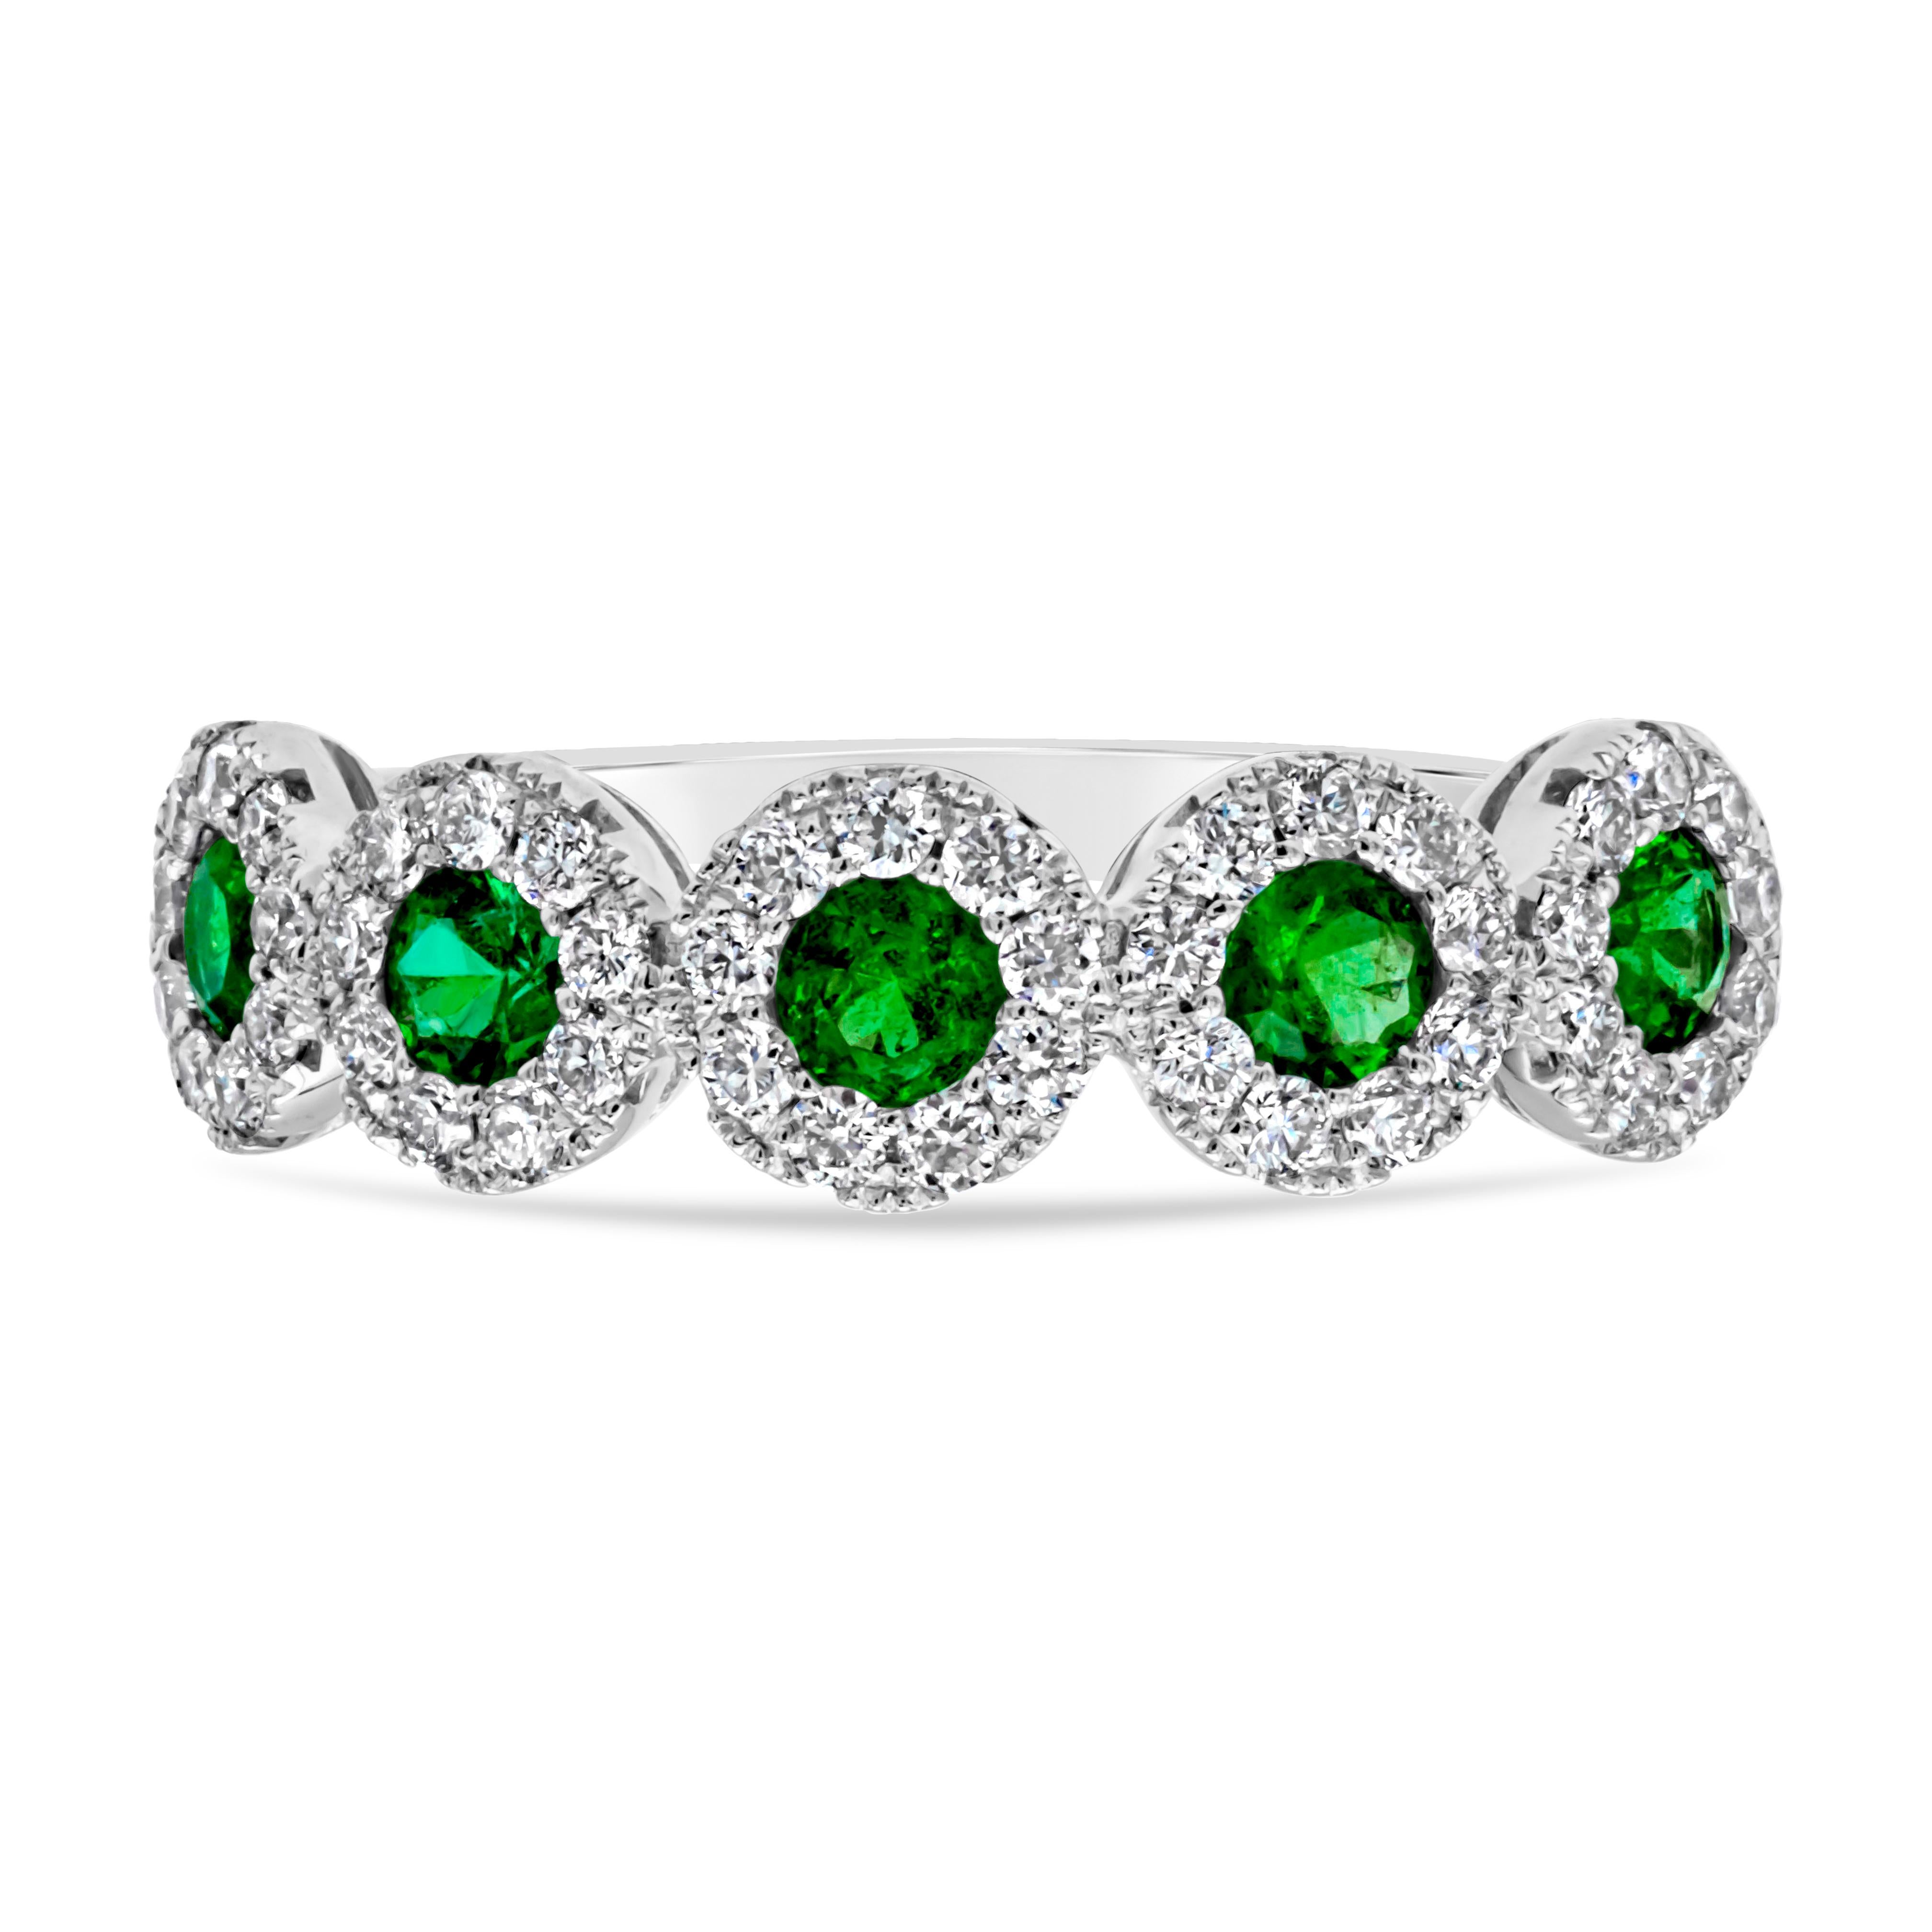 A classic and brilliant wedding band, featuring five color-rich round cut green emeralds weighing 0.40 carat total. Each emerald is surrounded by a halo of round brilliant cut diamonds weighing 0.39 carat total with F color and VS-SI clarity. Finely